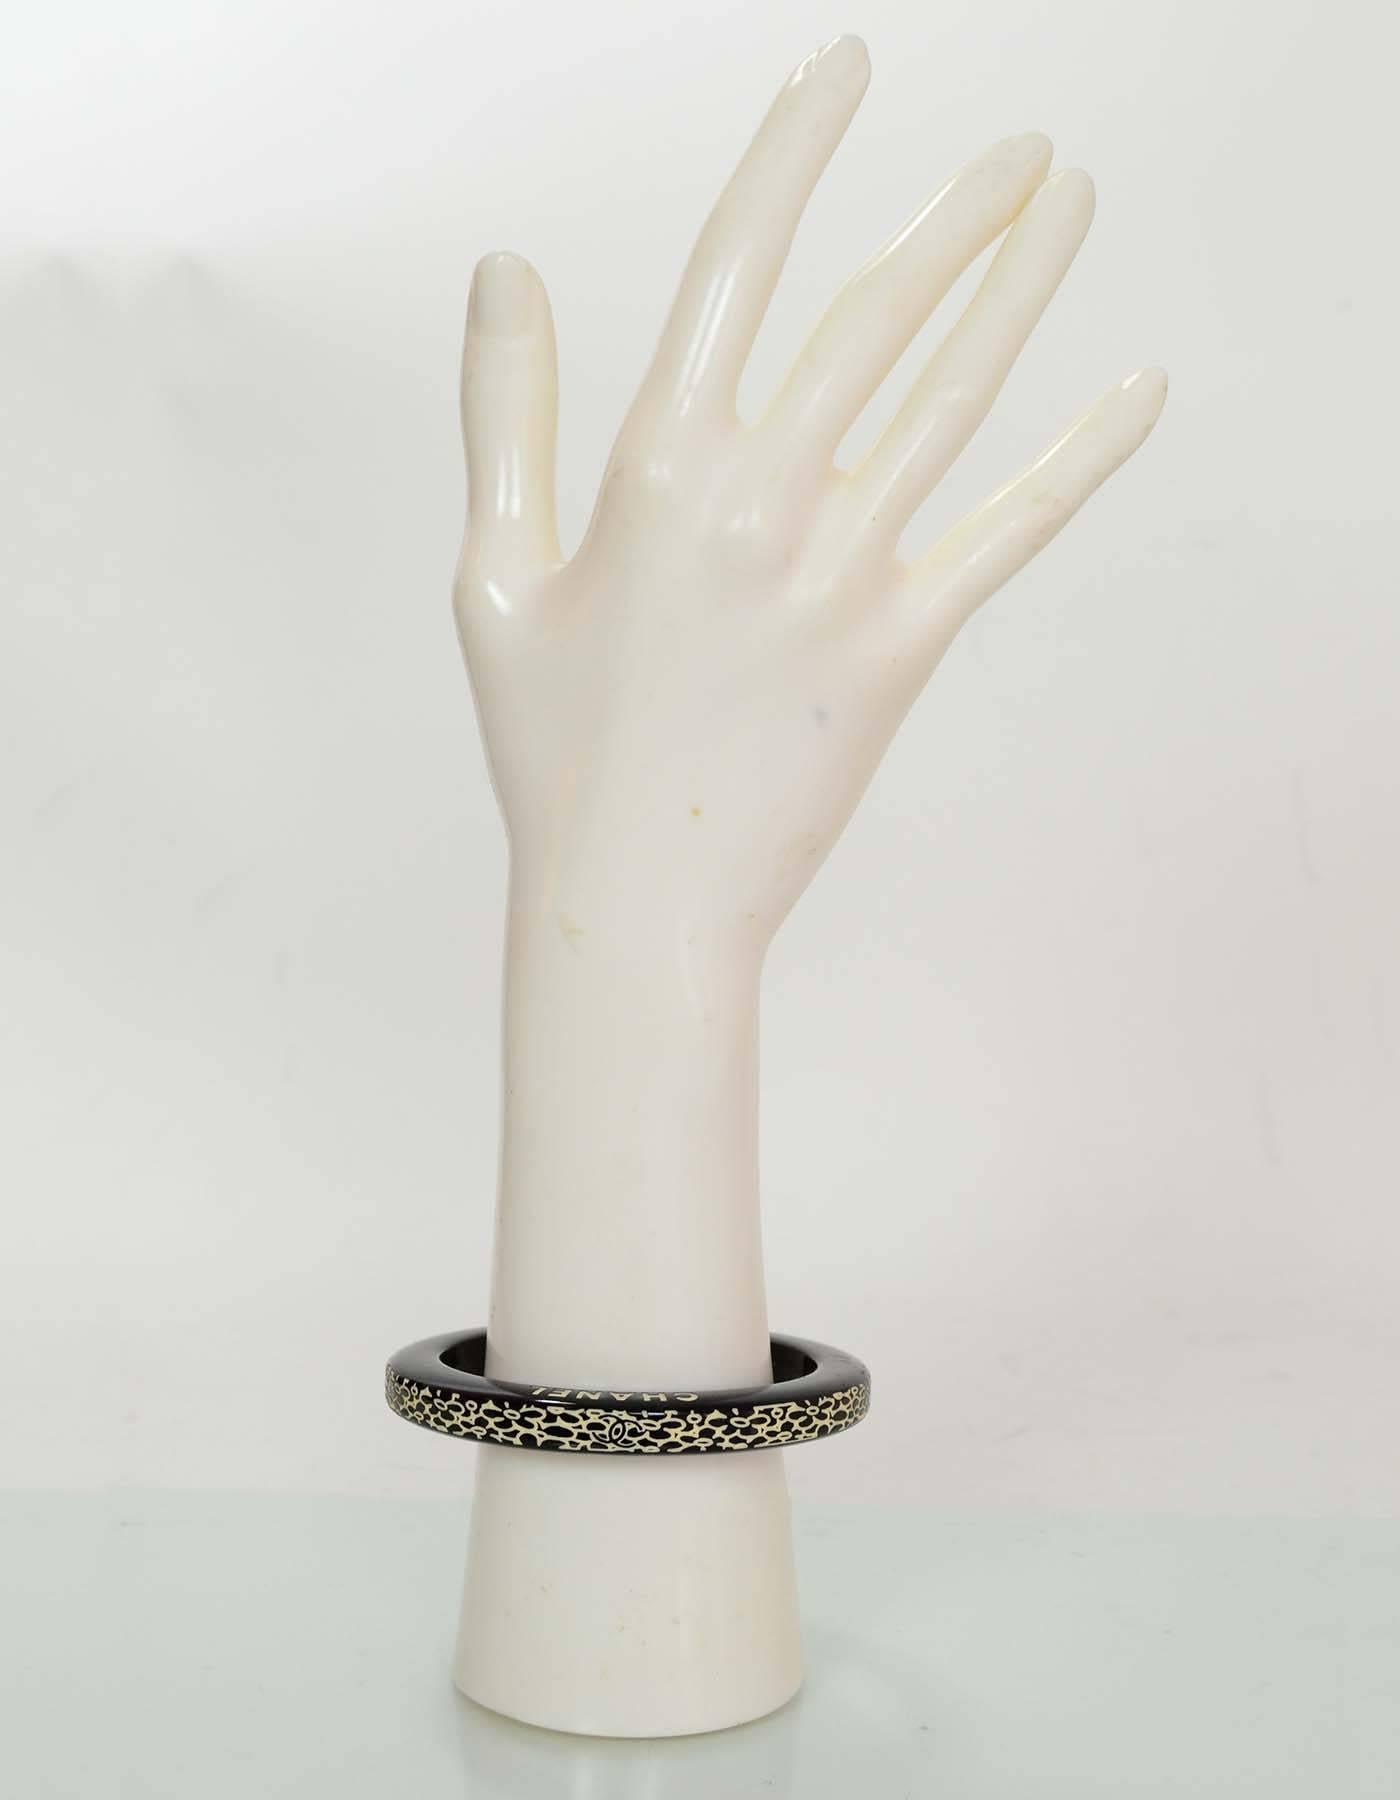 Chanel Black and White Resin Bangle

Made In: Italy
Year of Production: 2006 cruise
Color: Black and white
Materials: Resin
Closure: None
Stamp: Chanel 06 CC C Made in Italy
Overall Condition: Excellent Pre-Owned Condition with the exception